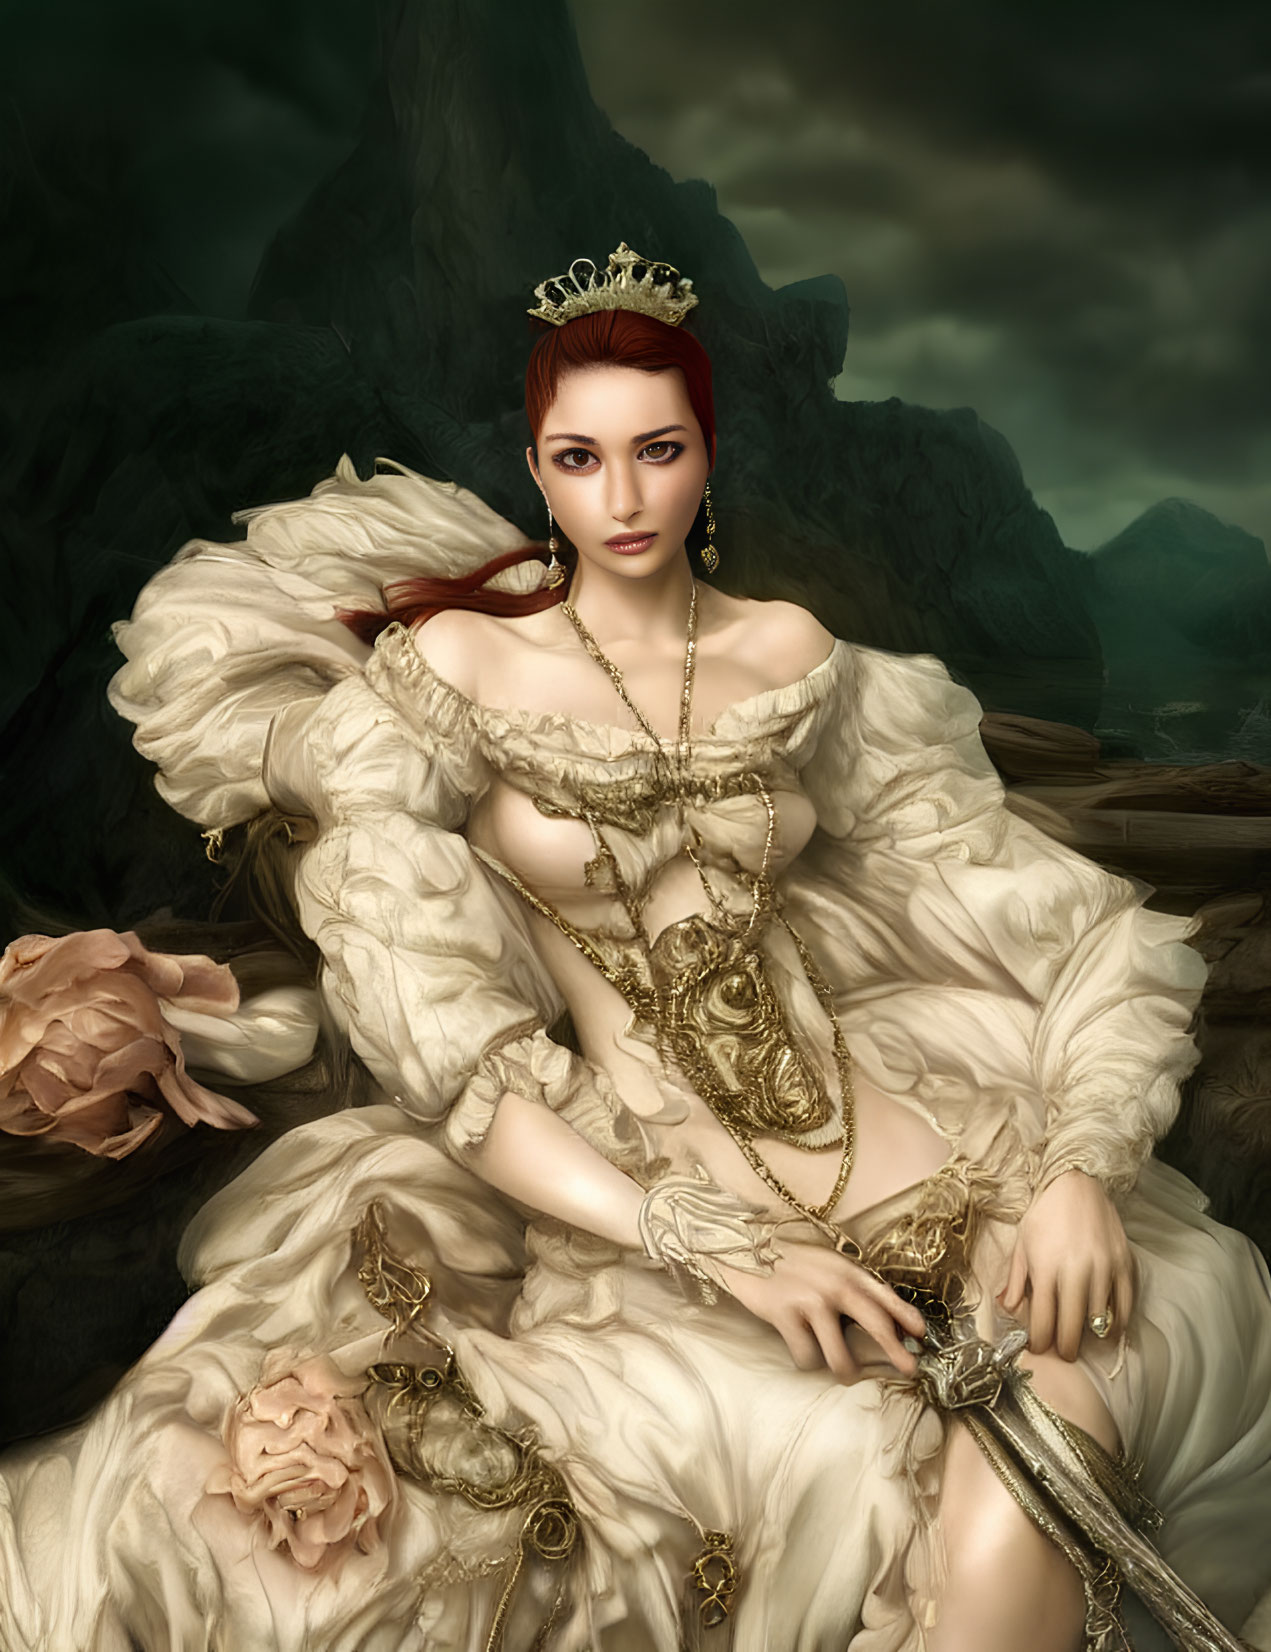 Regal woman with red hair in luxurious white gown and crown against stormy background